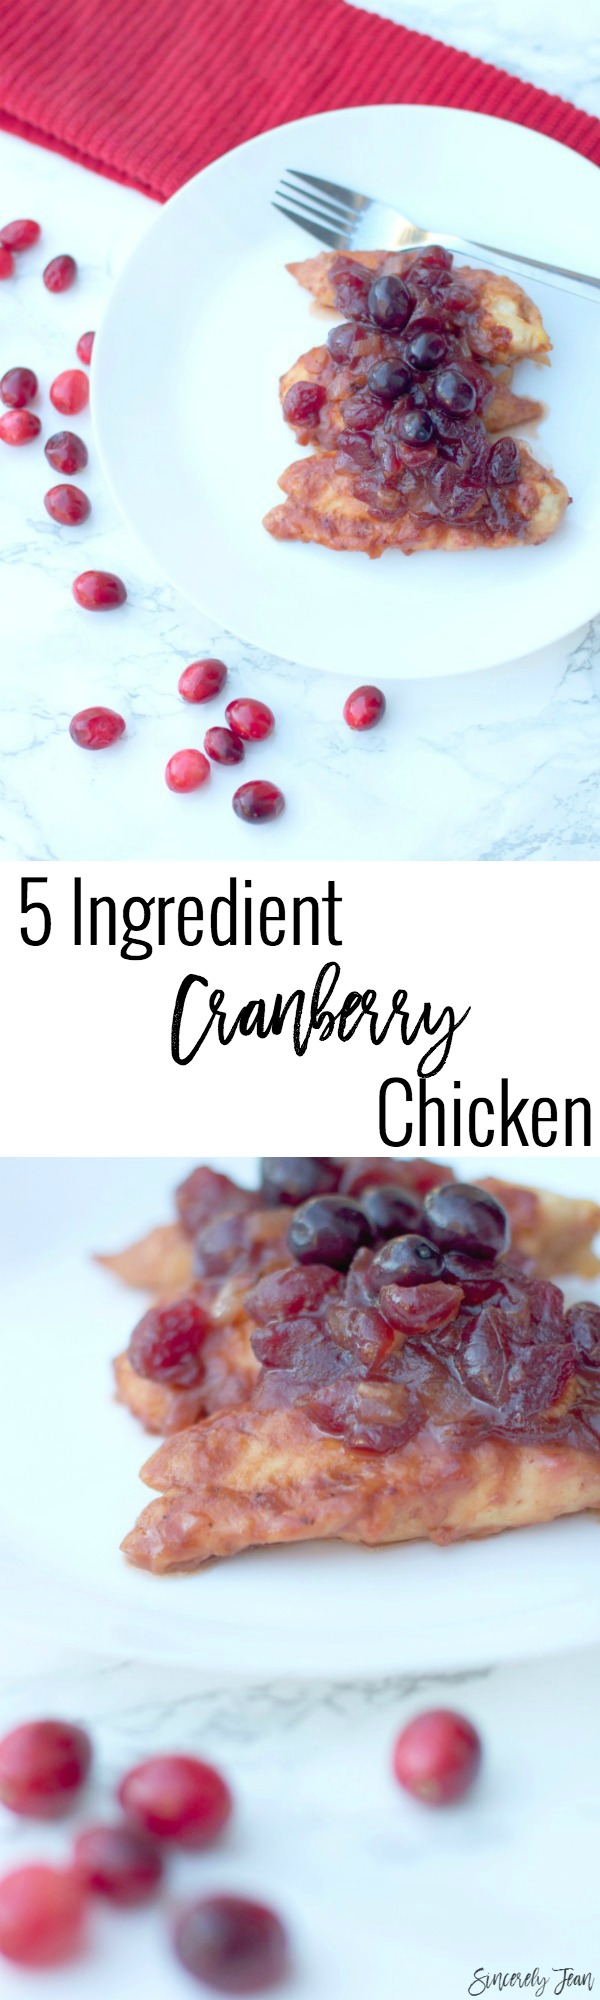 Five ingredient Cranberry Chicken - perfect for the holidays! By SincerelyJean.com, Your home for 5 ingredient recipes